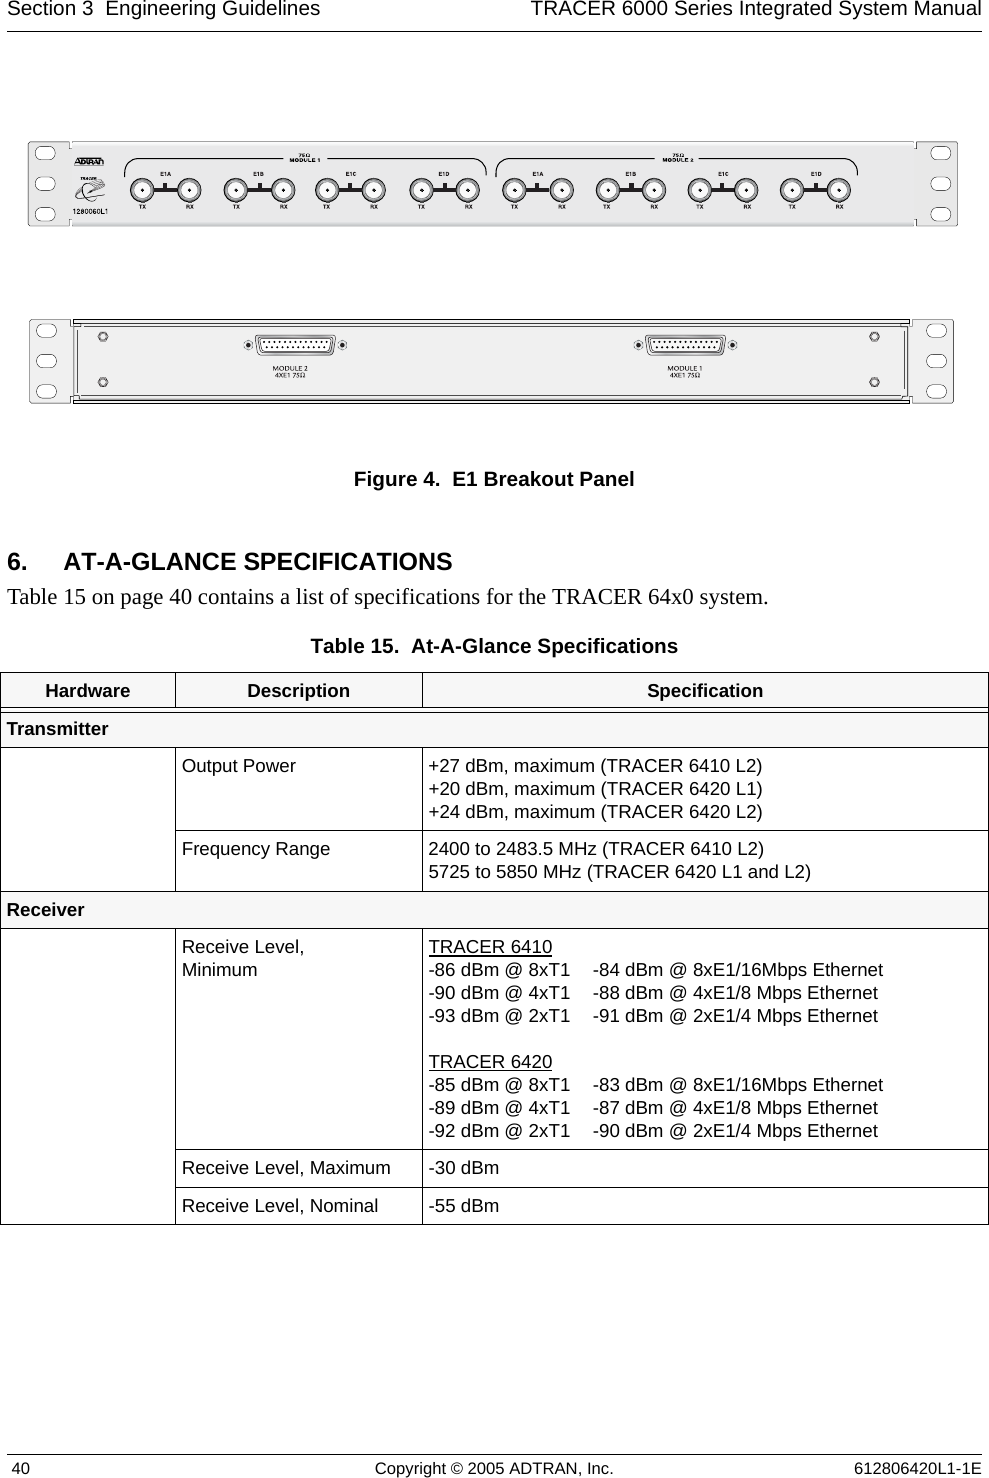 Section 3  Engineering Guidelines TRACER 6000 Series Integrated System Manual 40 Copyright © 2005 ADTRAN, Inc. 612806420L1-1EFigure 4.  E1 Breakout Panel6. AT-A-GLANCE SPECIFICATIONSTable 15 on page 40 contains a list of specifications for the TRACER 64x0 system.Table 15.  At-A-Glance Specifications  Hardware Description SpecificationTransmitterOutput Power +27 dBm, maximum (TRACER 6410 L2)+20 dBm, maximum (TRACER 6420 L1)+24 dBm, maximum (TRACER 6420 L2)Frequency Range 2400 to 2483.5 MHz (TRACER 6410 L2)5725 to 5850 MHz (TRACER 6420 L1 and L2)ReceiverReceive Level, Minimum TRACER 6410-86 dBm @ 8xT1 -90 dBm @ 4xT1-93 dBm @ 2xT1TRACER 6420-85 dBm @ 8xT1 -89 dBm @ 4xT1-92 dBm @ 2xT1-84 dBm @ 8xE1/16Mbps Ethernet-88 dBm @ 4xE1/8 Mbps Ethernet-91 dBm @ 2xE1/4 Mbps Ethernet-83 dBm @ 8xE1/16Mbps Ethernet-87 dBm @ 4xE1/8 Mbps Ethernet-90 dBm @ 2xE1/4 Mbps EthernetReceive Level, Maximum -30 dBm Receive Level, Nominal -55 dBm 